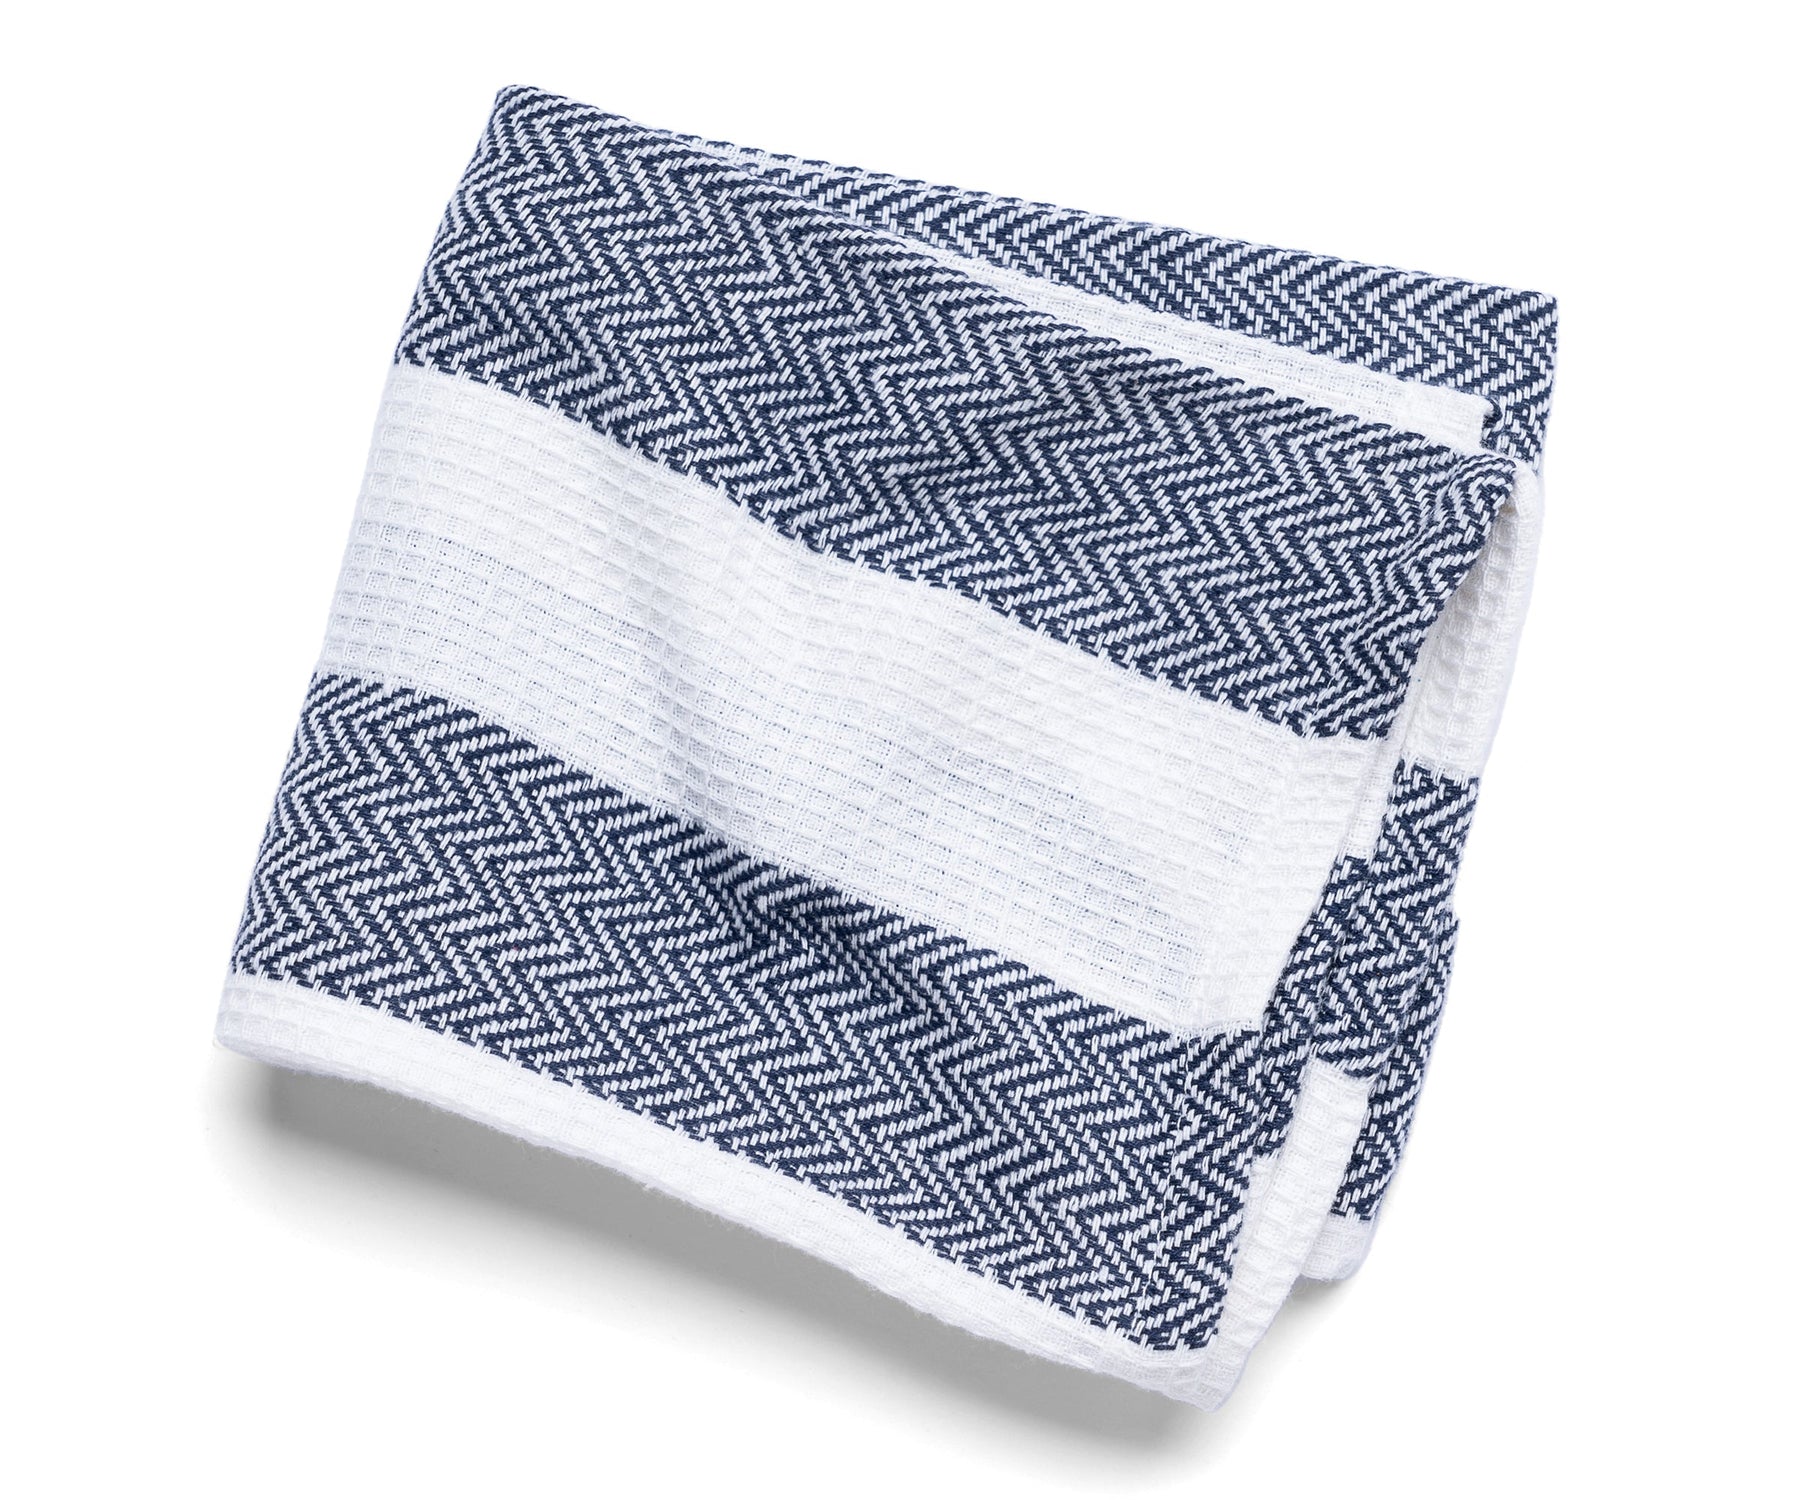 Teal and White Gingham Tea Towels  The Stripes Company United States